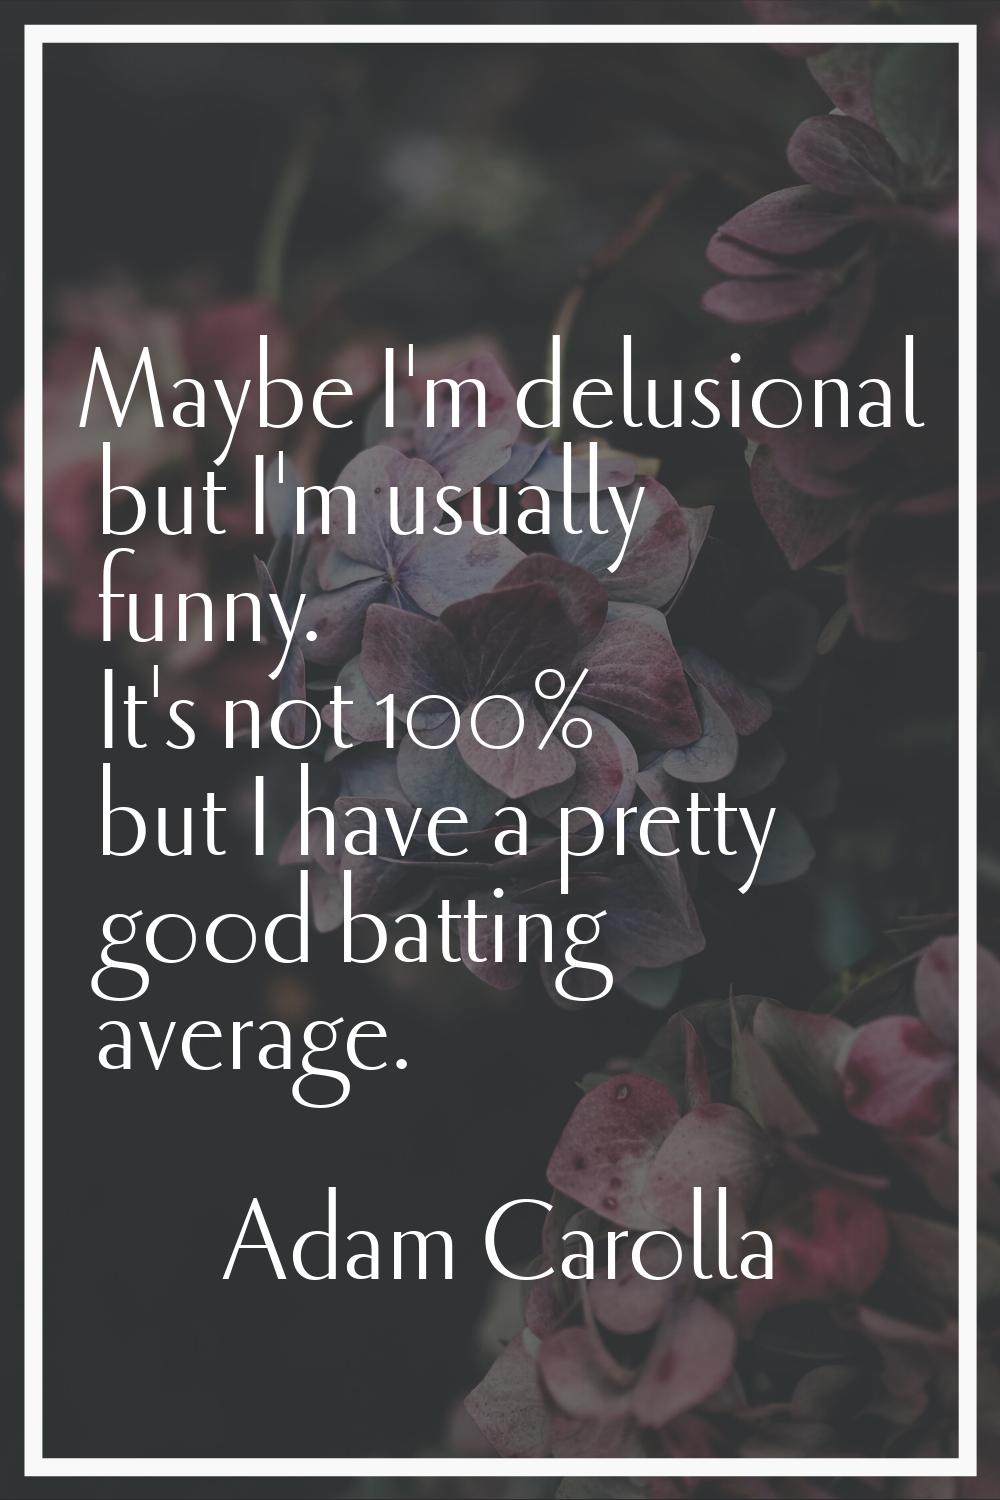 Maybe I'm delusional but I'm usually funny. It's not 100% but I have a pretty good batting average.